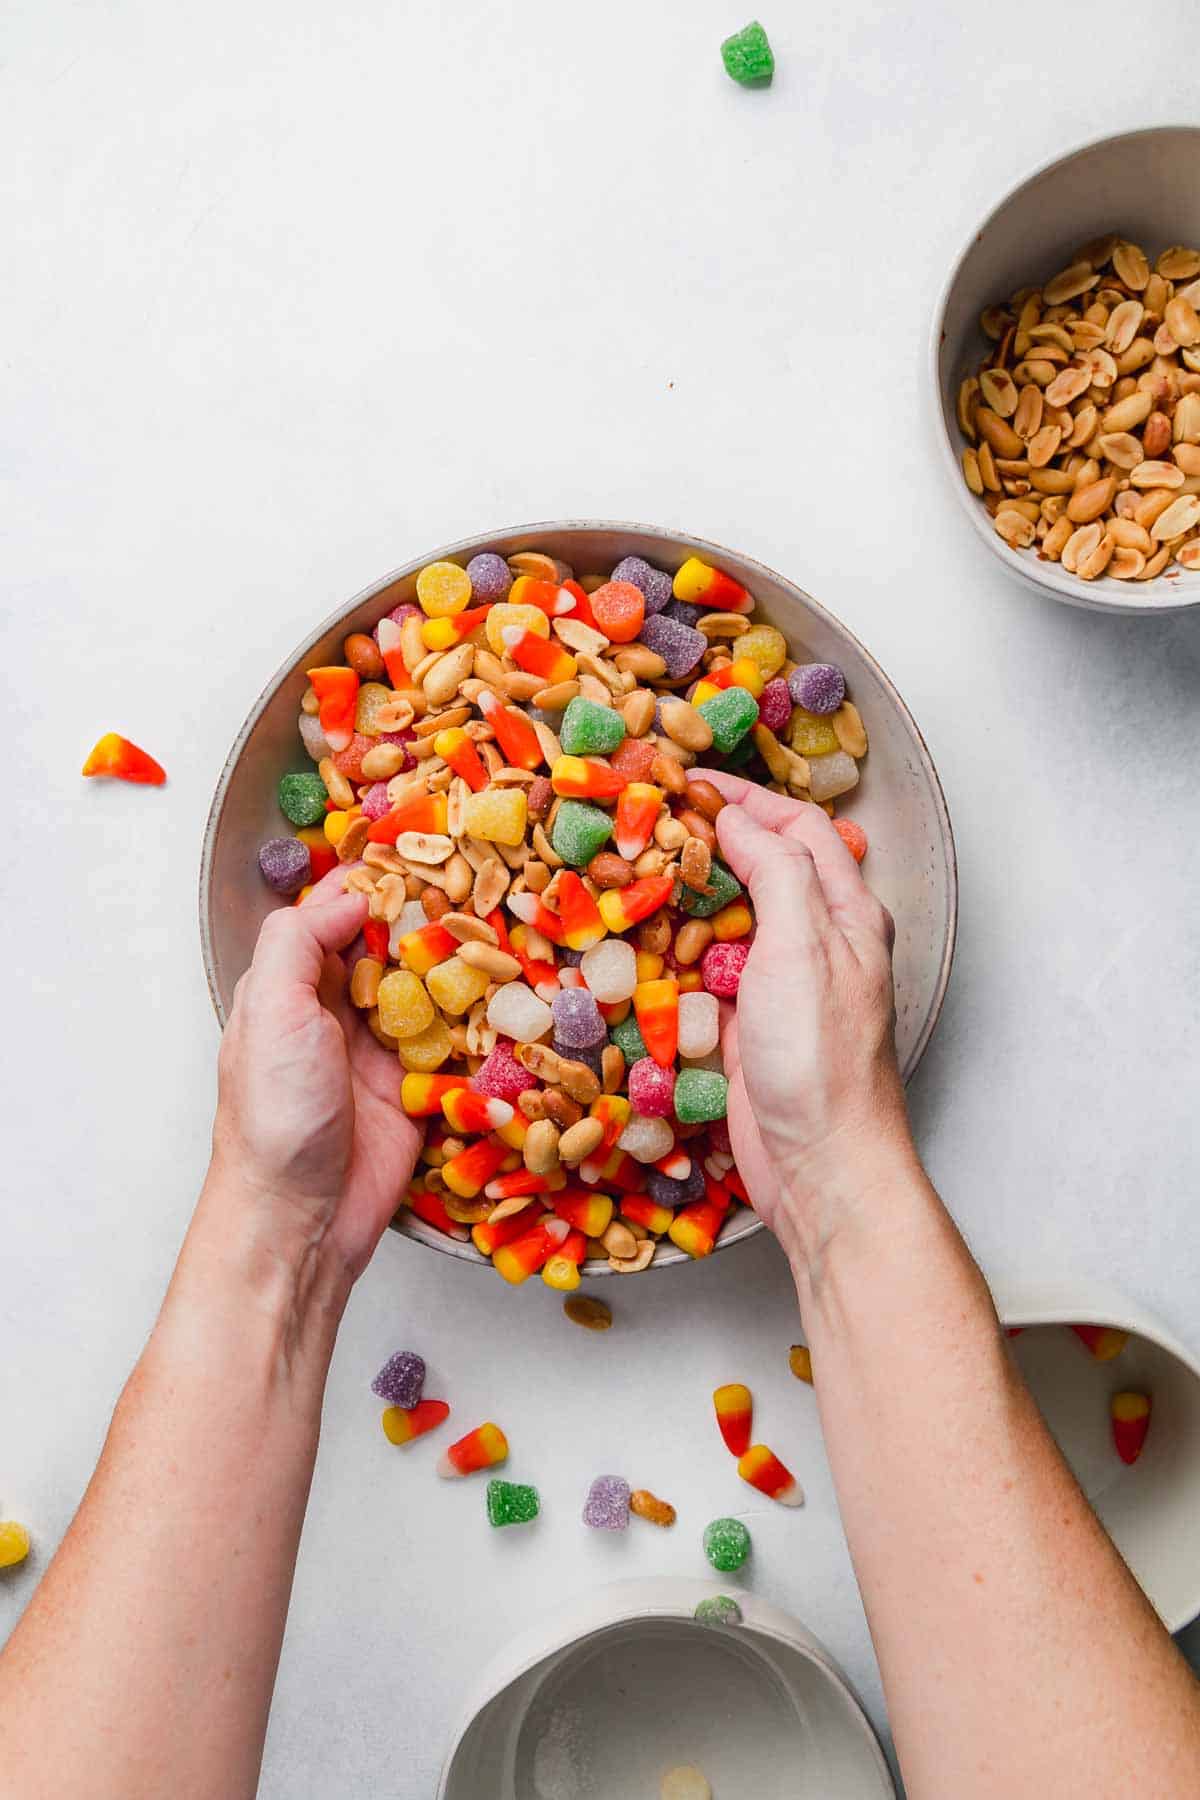 Hands mixing the candy corn snack mix together.